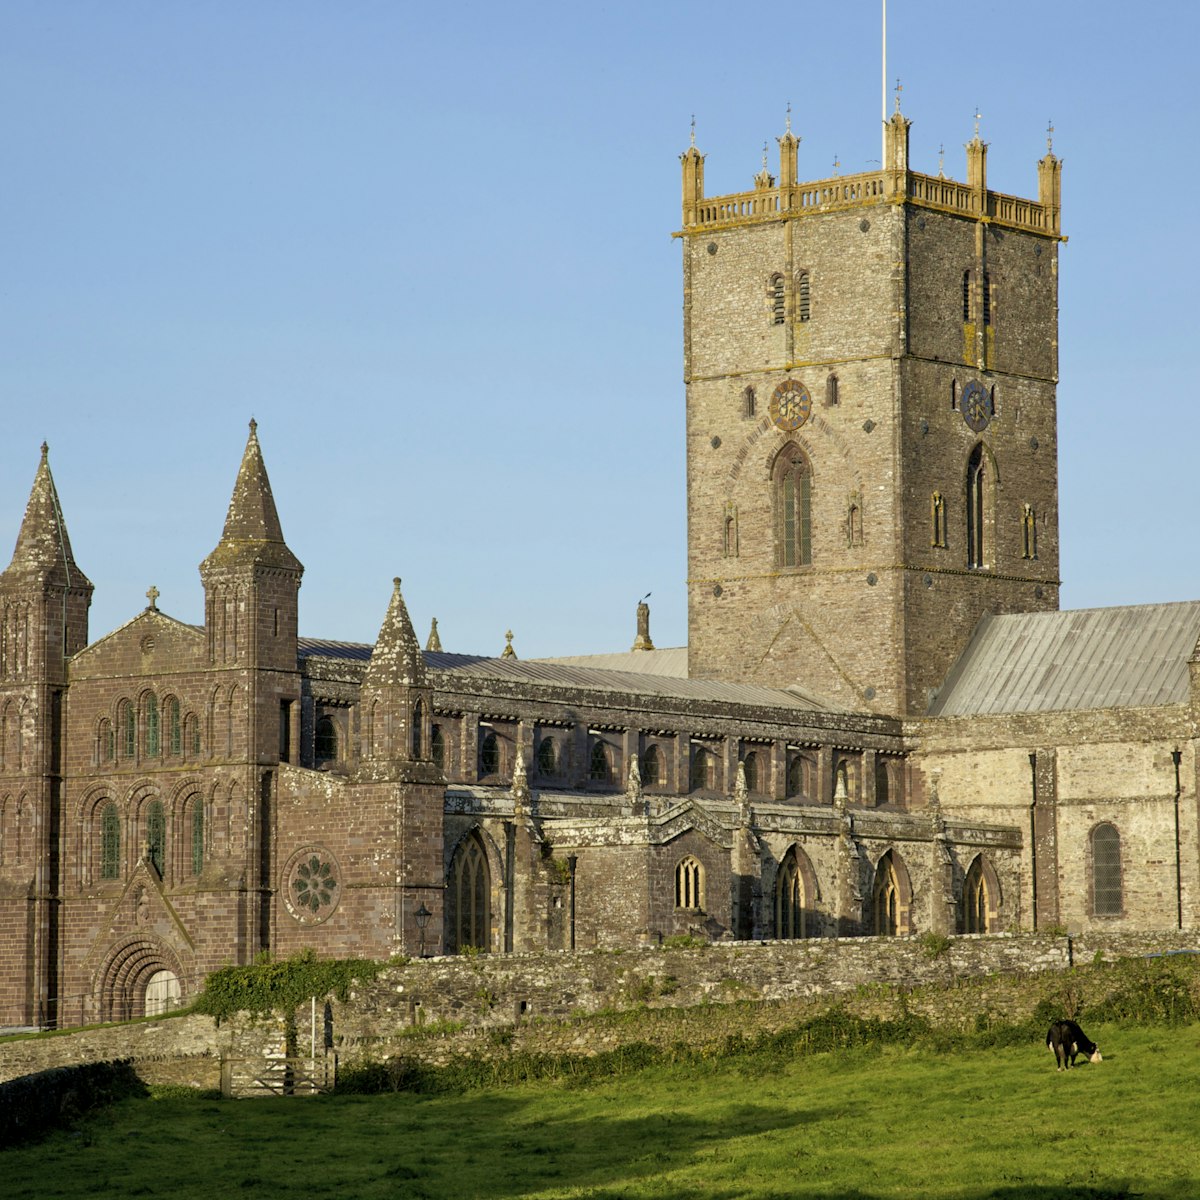 Wales - St David's Cathedral